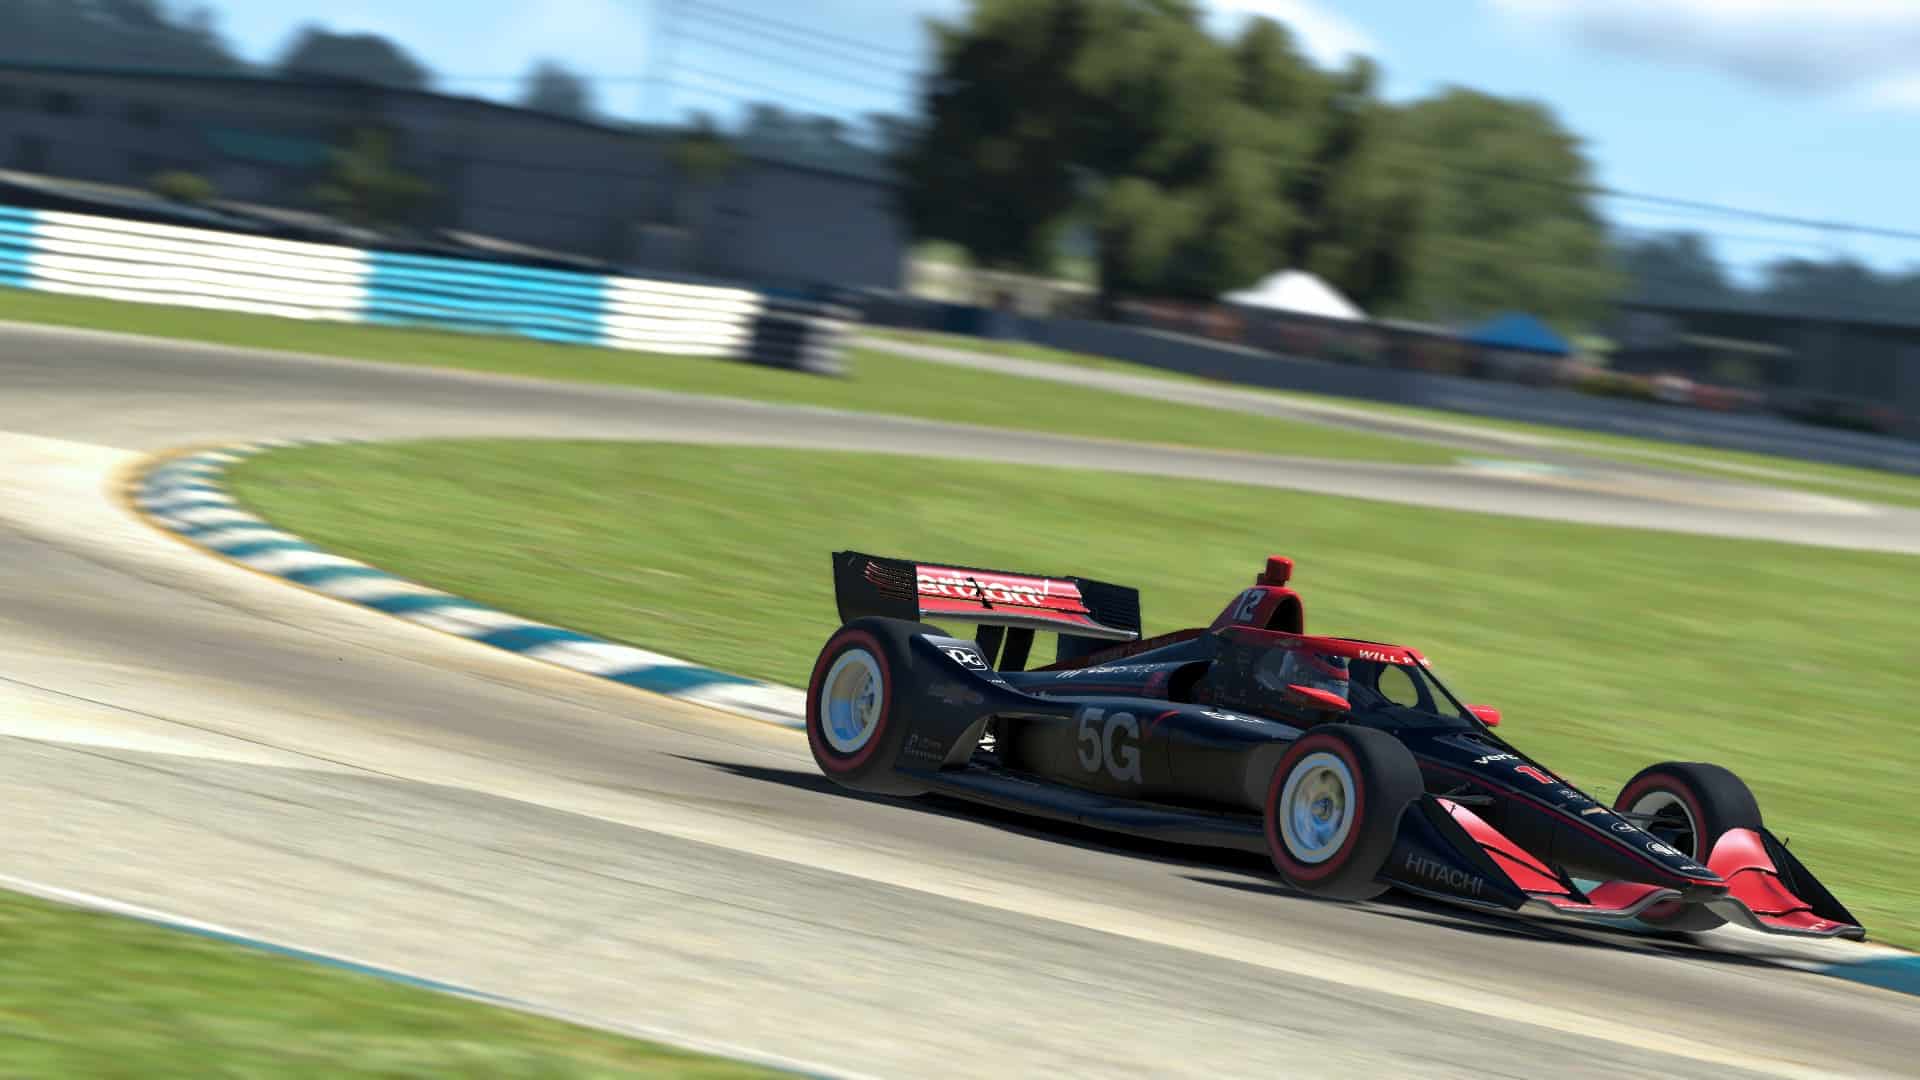 iRacing 2021 Season 2 Patch 3 re-adds New Damage Model